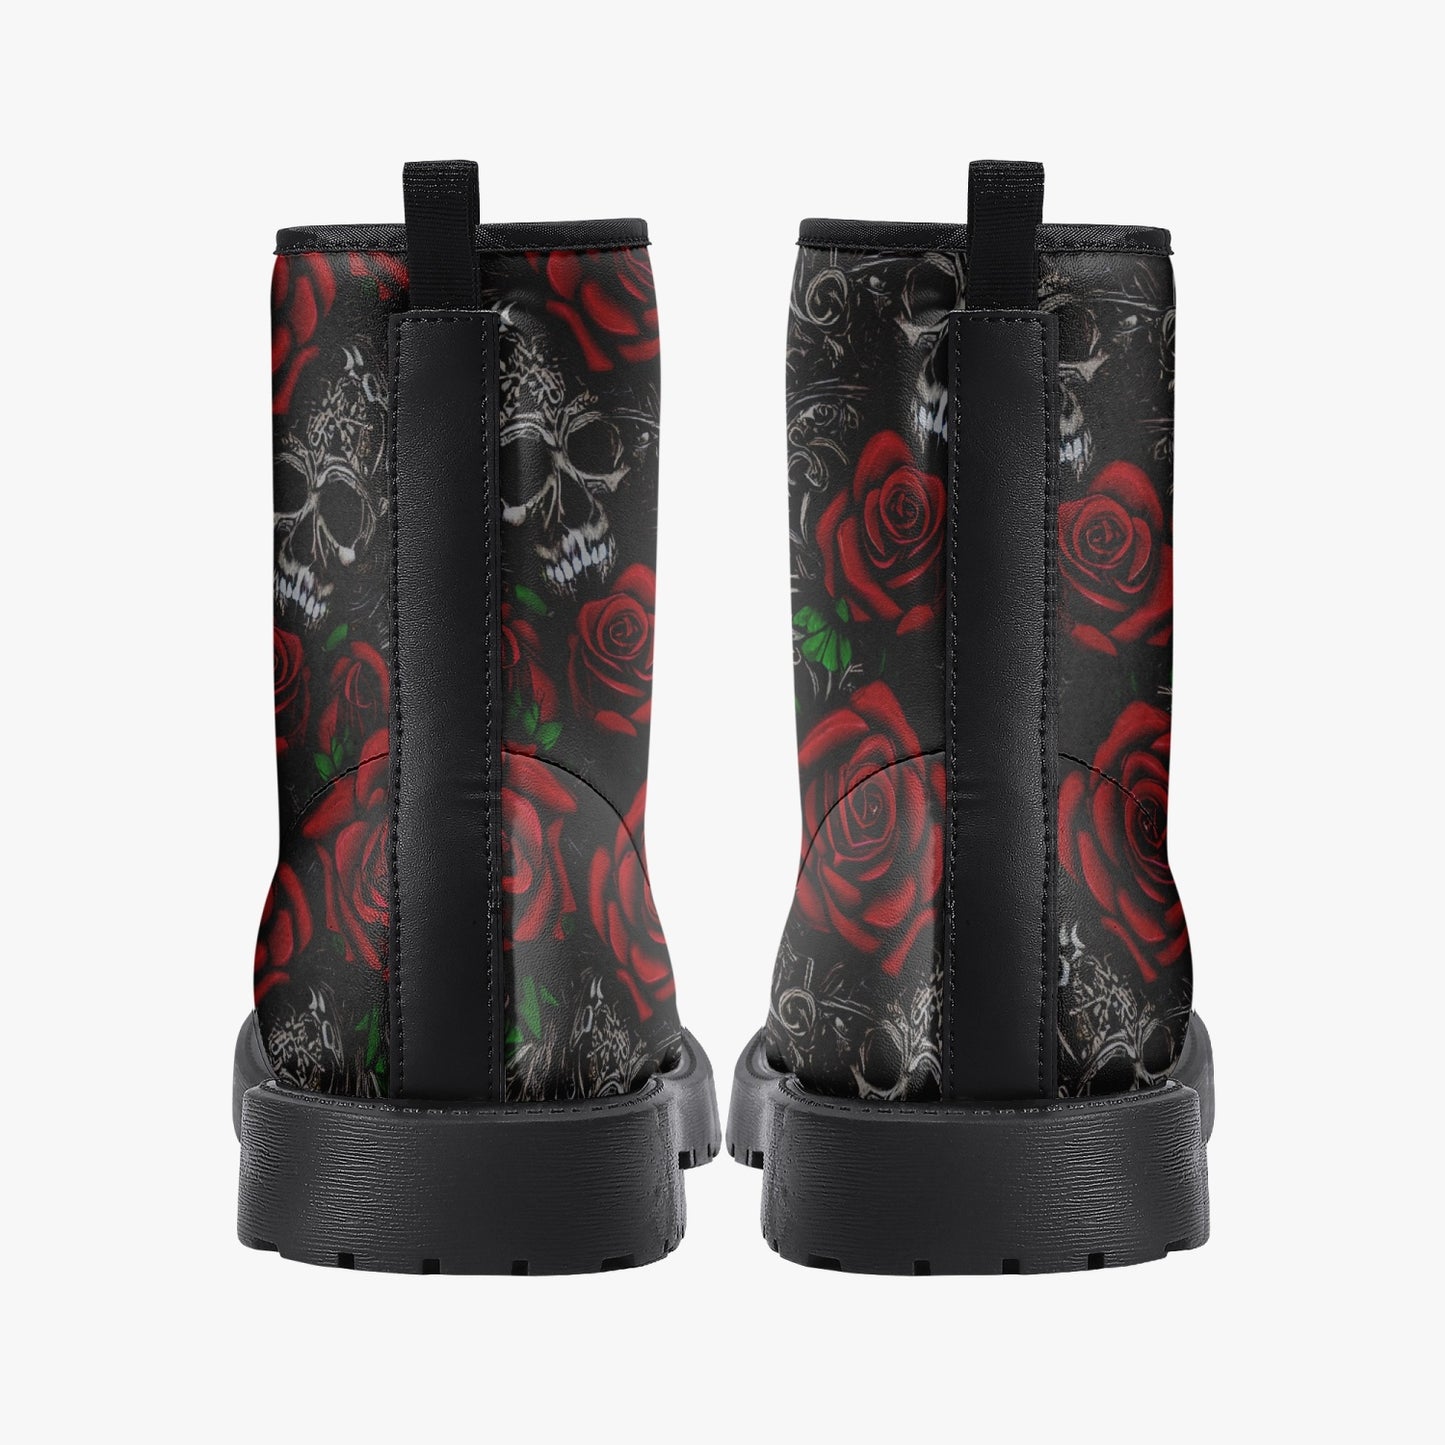 Women's Red Roses and Skulls Floral Pattern Combat Boots